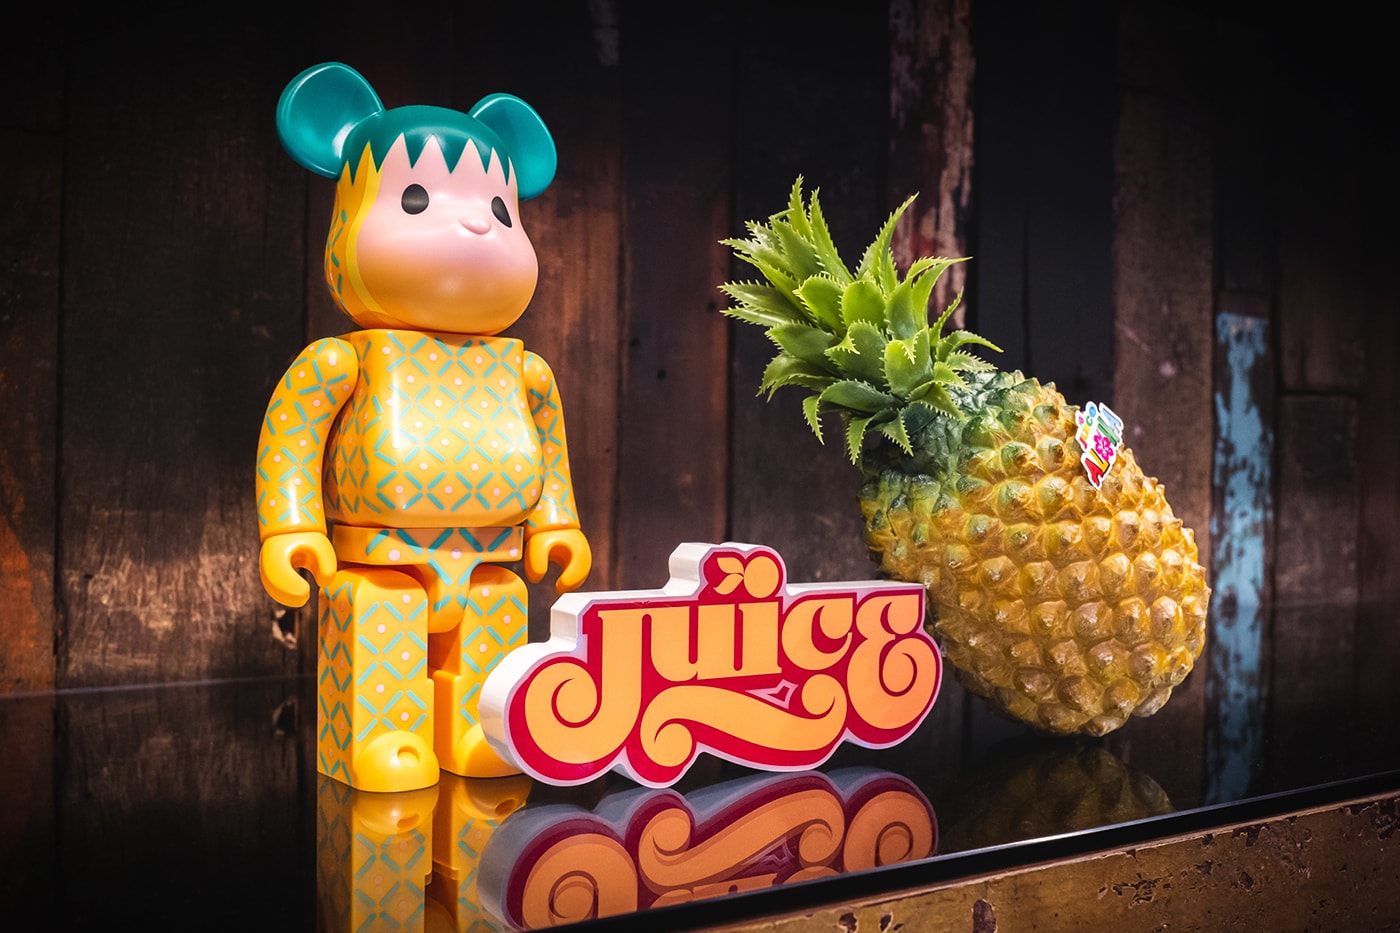 CLOT Medicom Toy BE@RBRICK Summer Fruits Pink Pineapple Closer Look Release Info Date Buy Price 